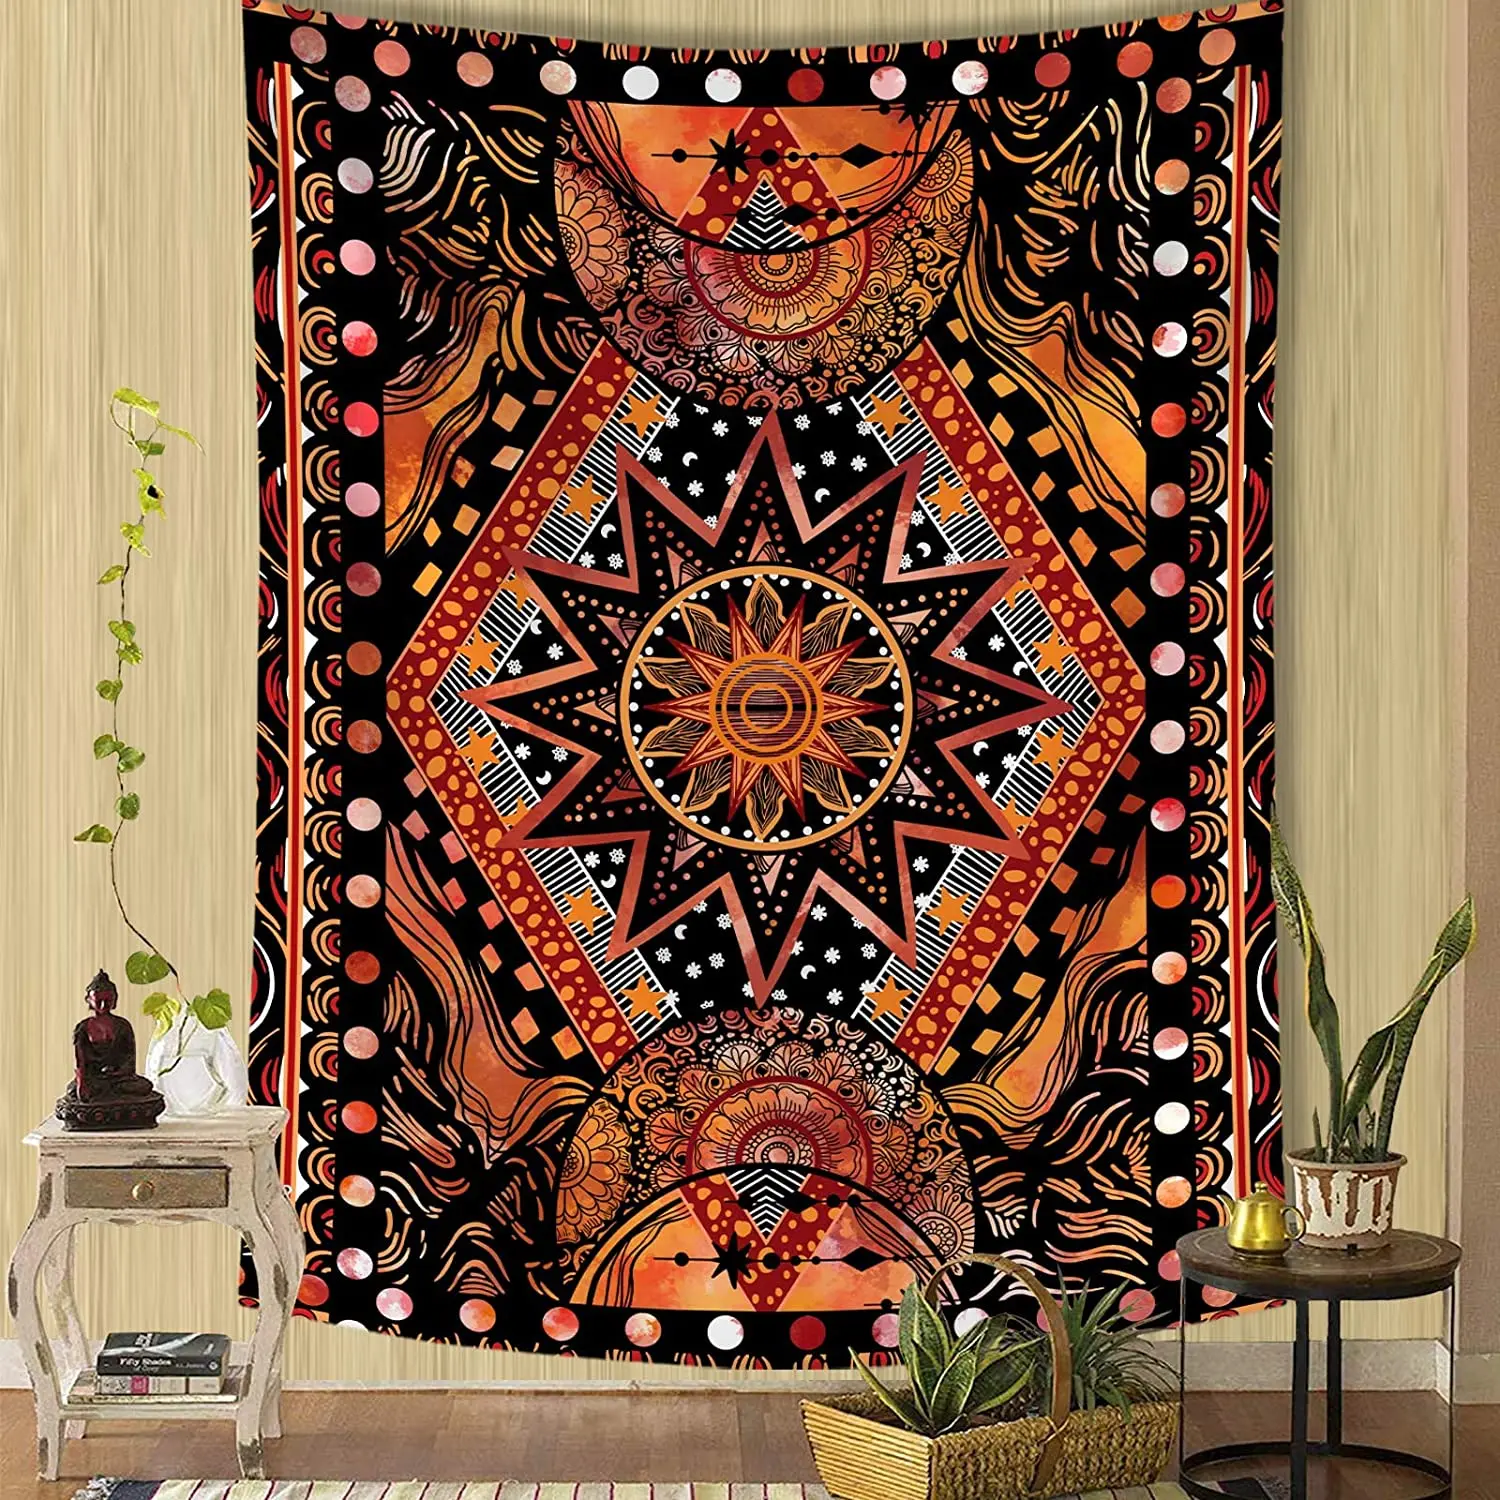 

Orange Sun Moon Hippie Mandala Tapestry Background Wall Covering Home Decoration Blanket Bedroom Wall Hanging Tapestries